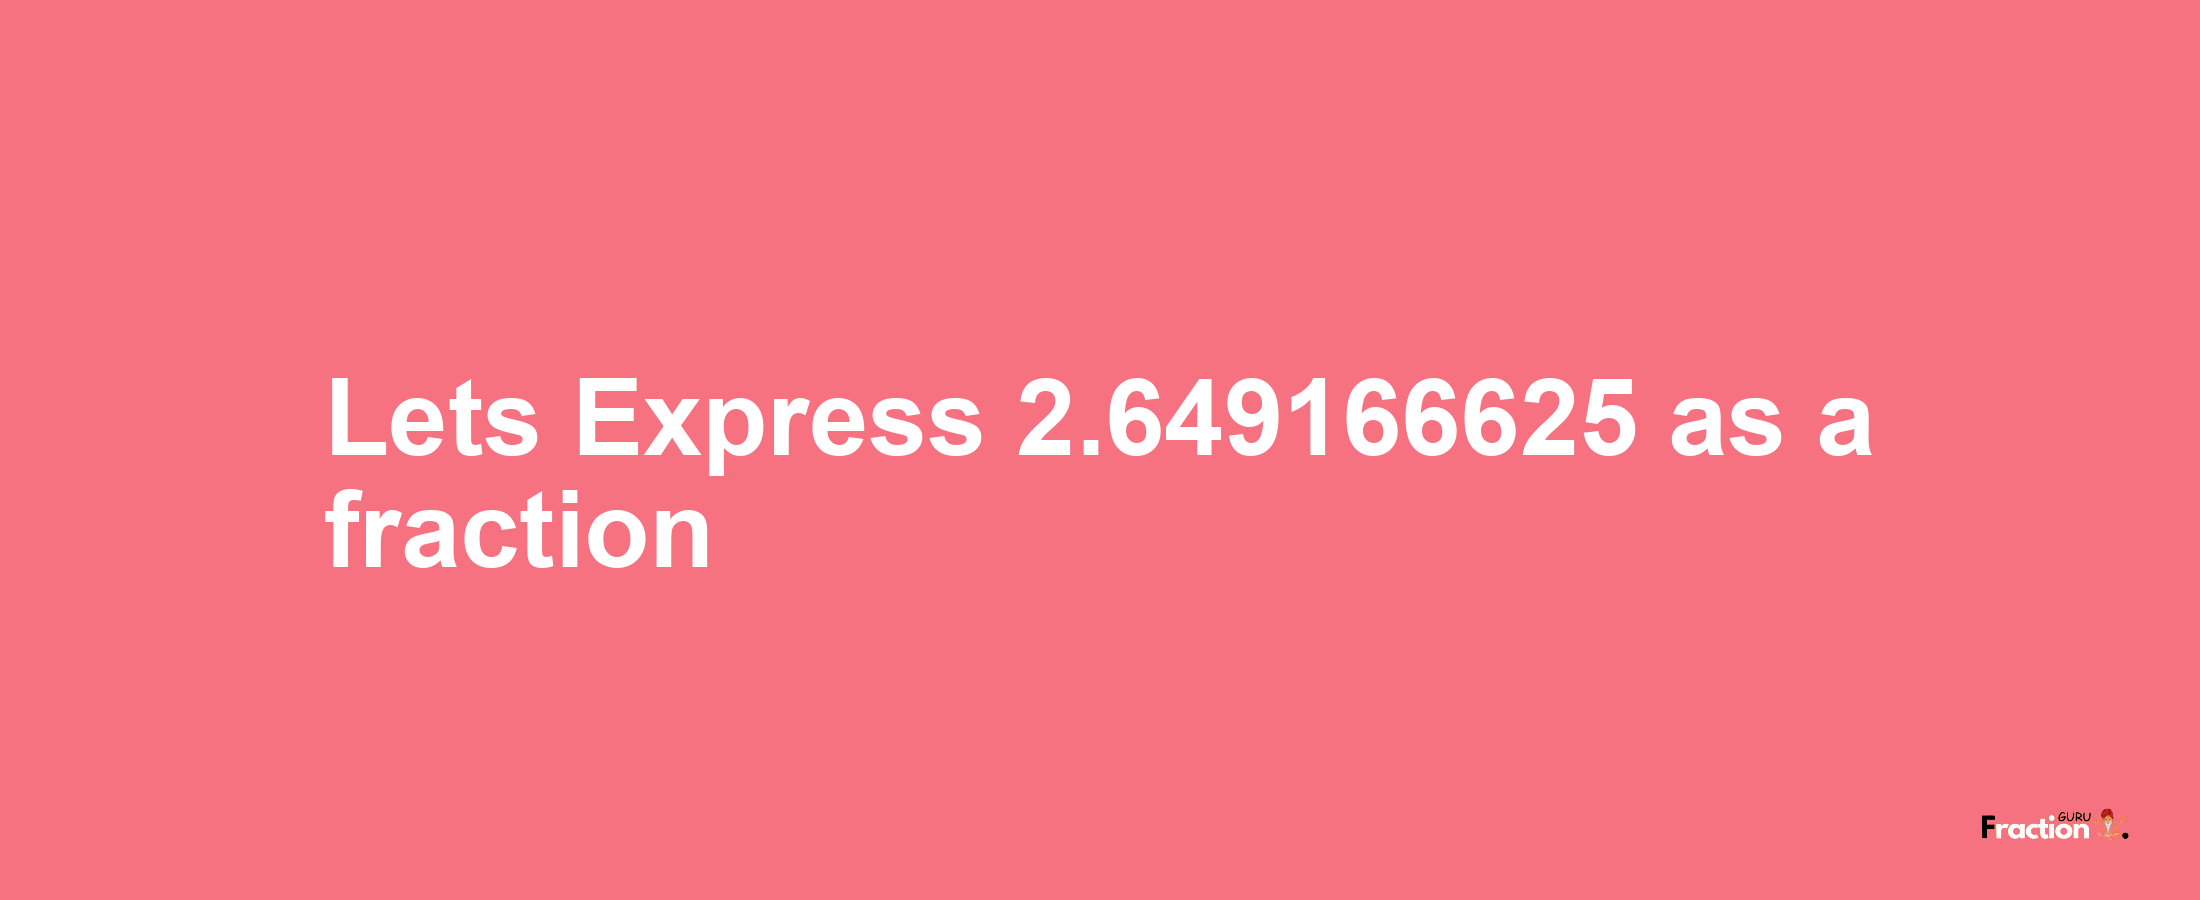 Lets Express 2.649166625 as afraction